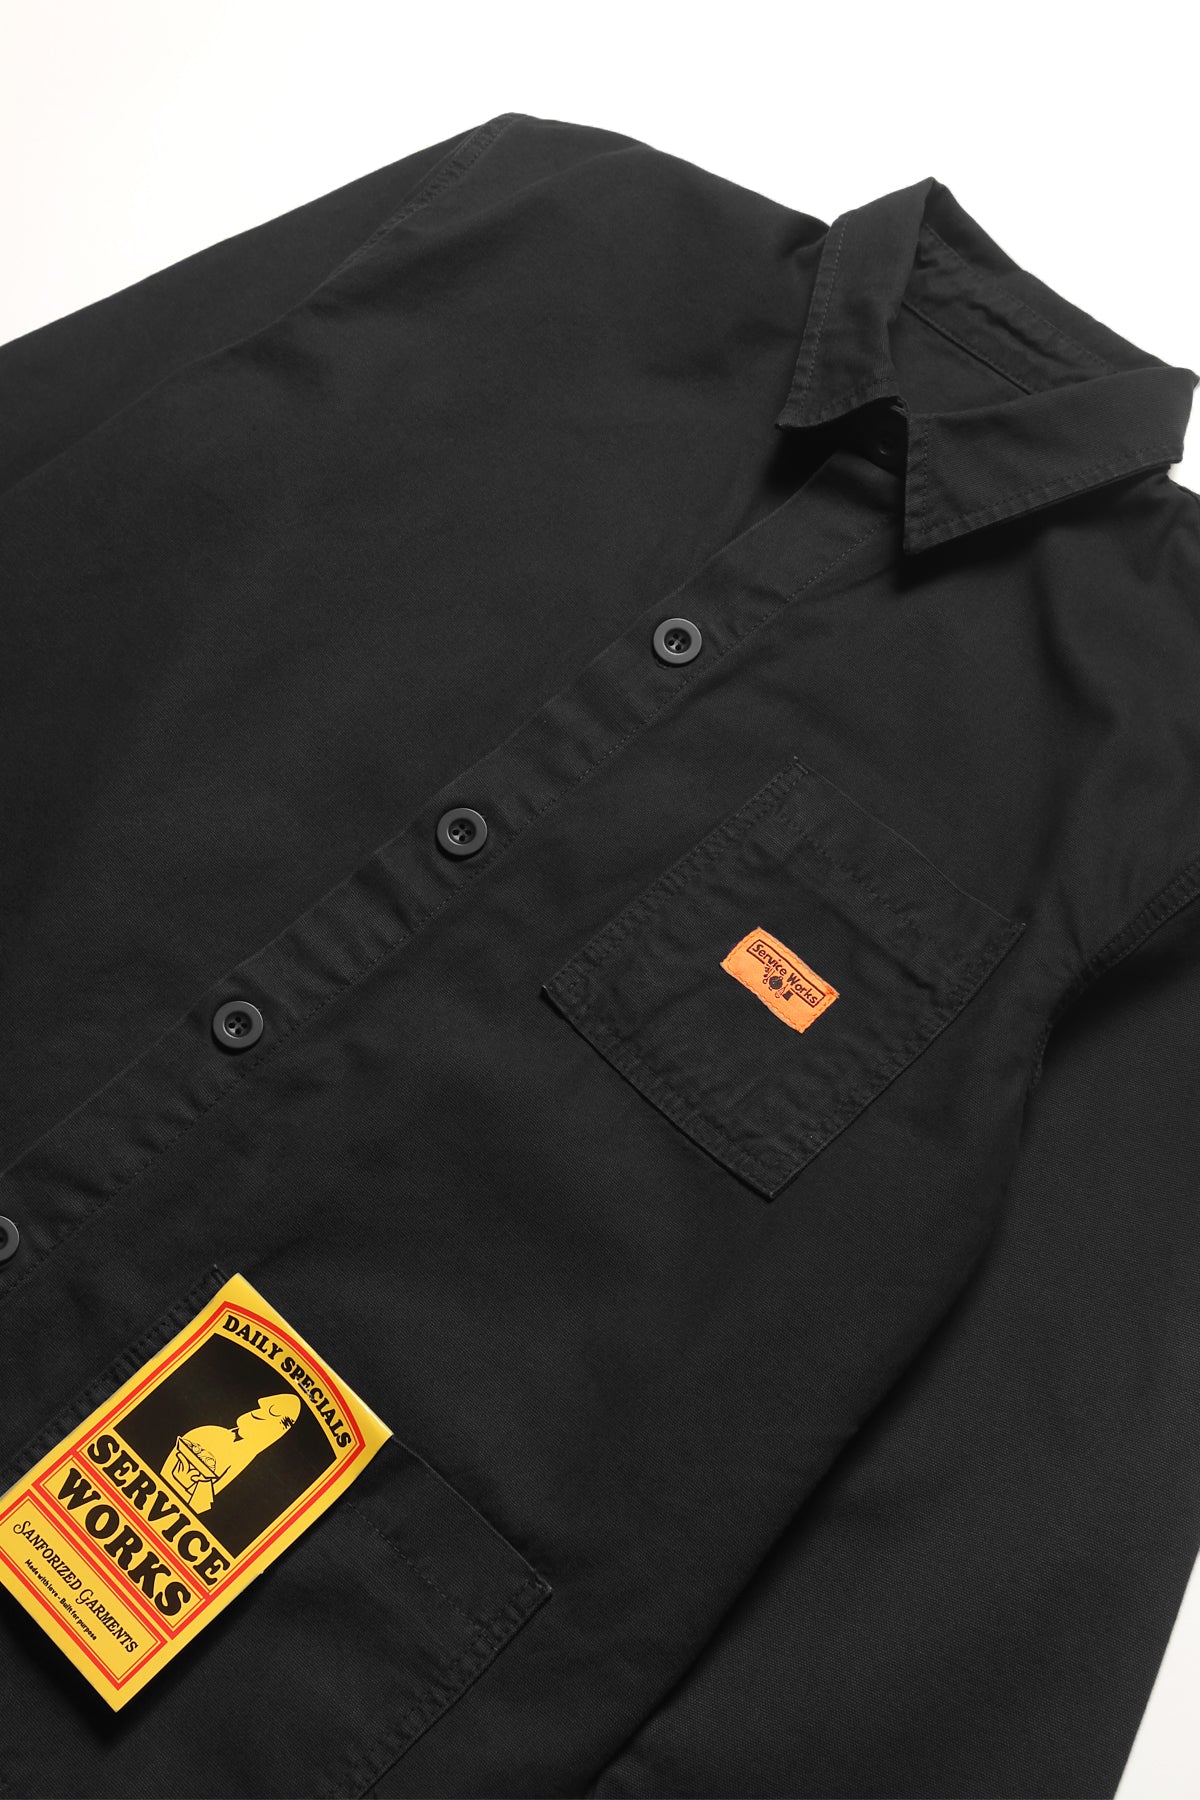 Service Works - Coverall Jacket - Black